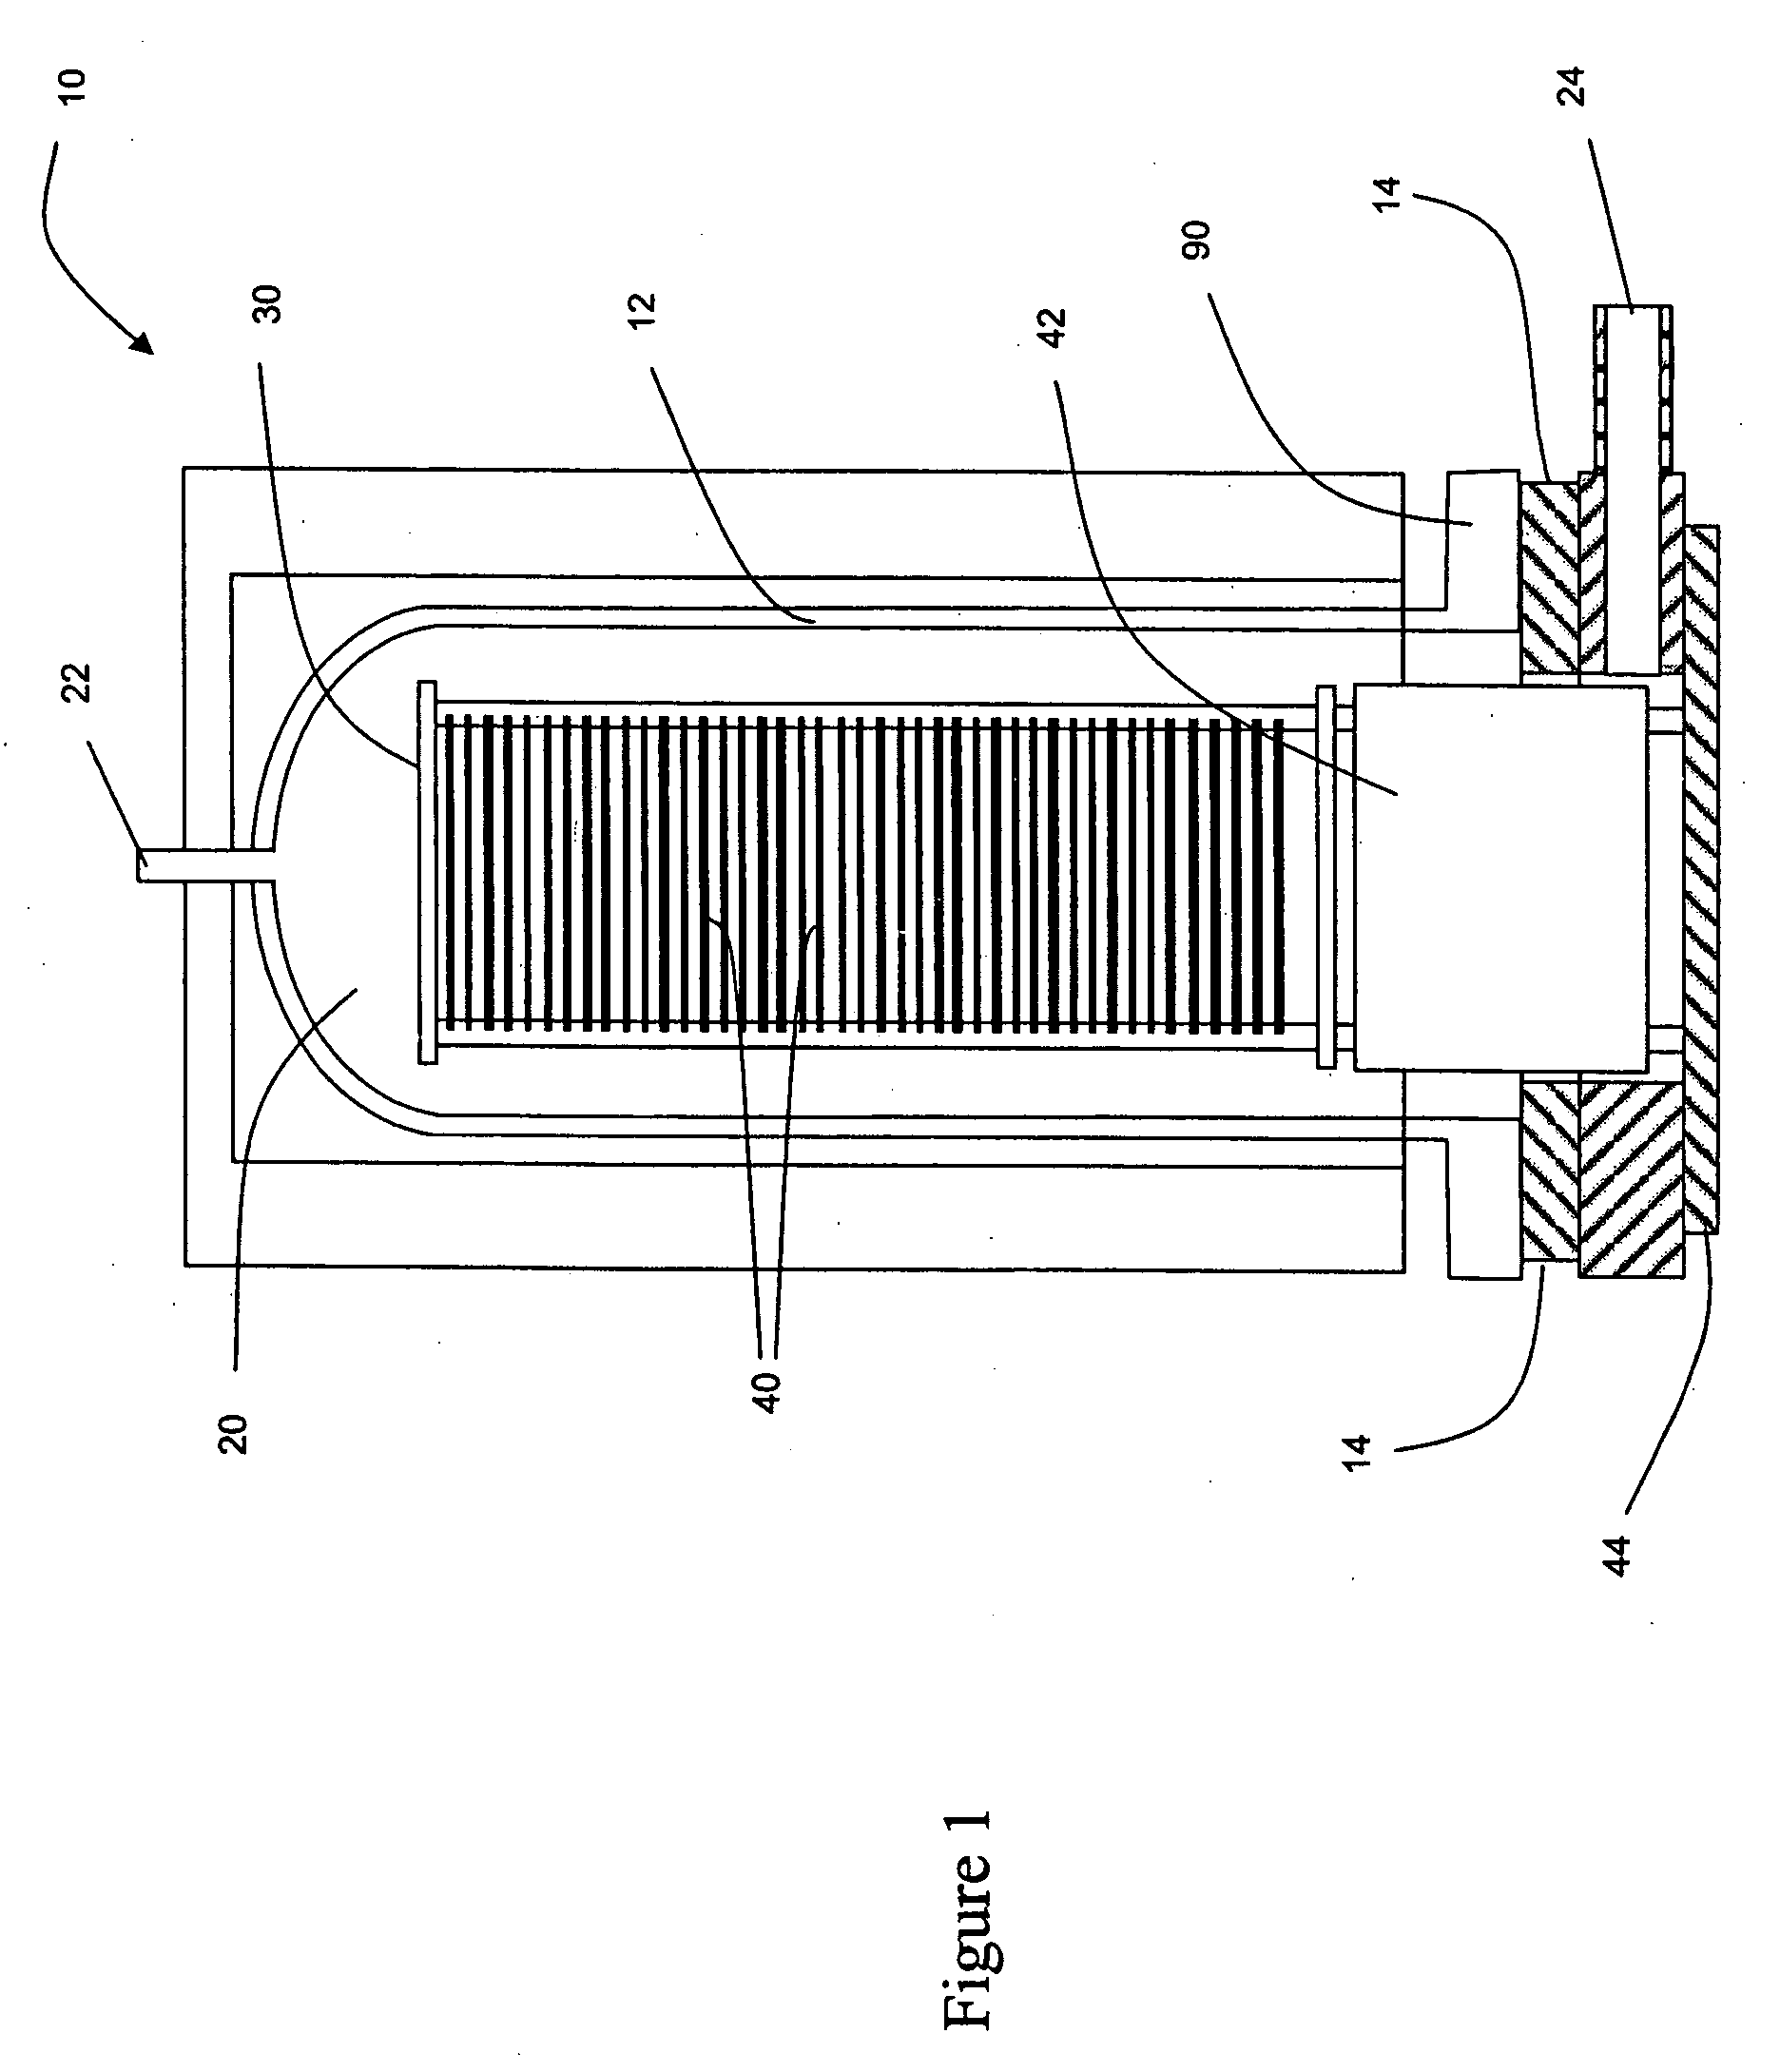 Deposition of TiN films in a batch reactor